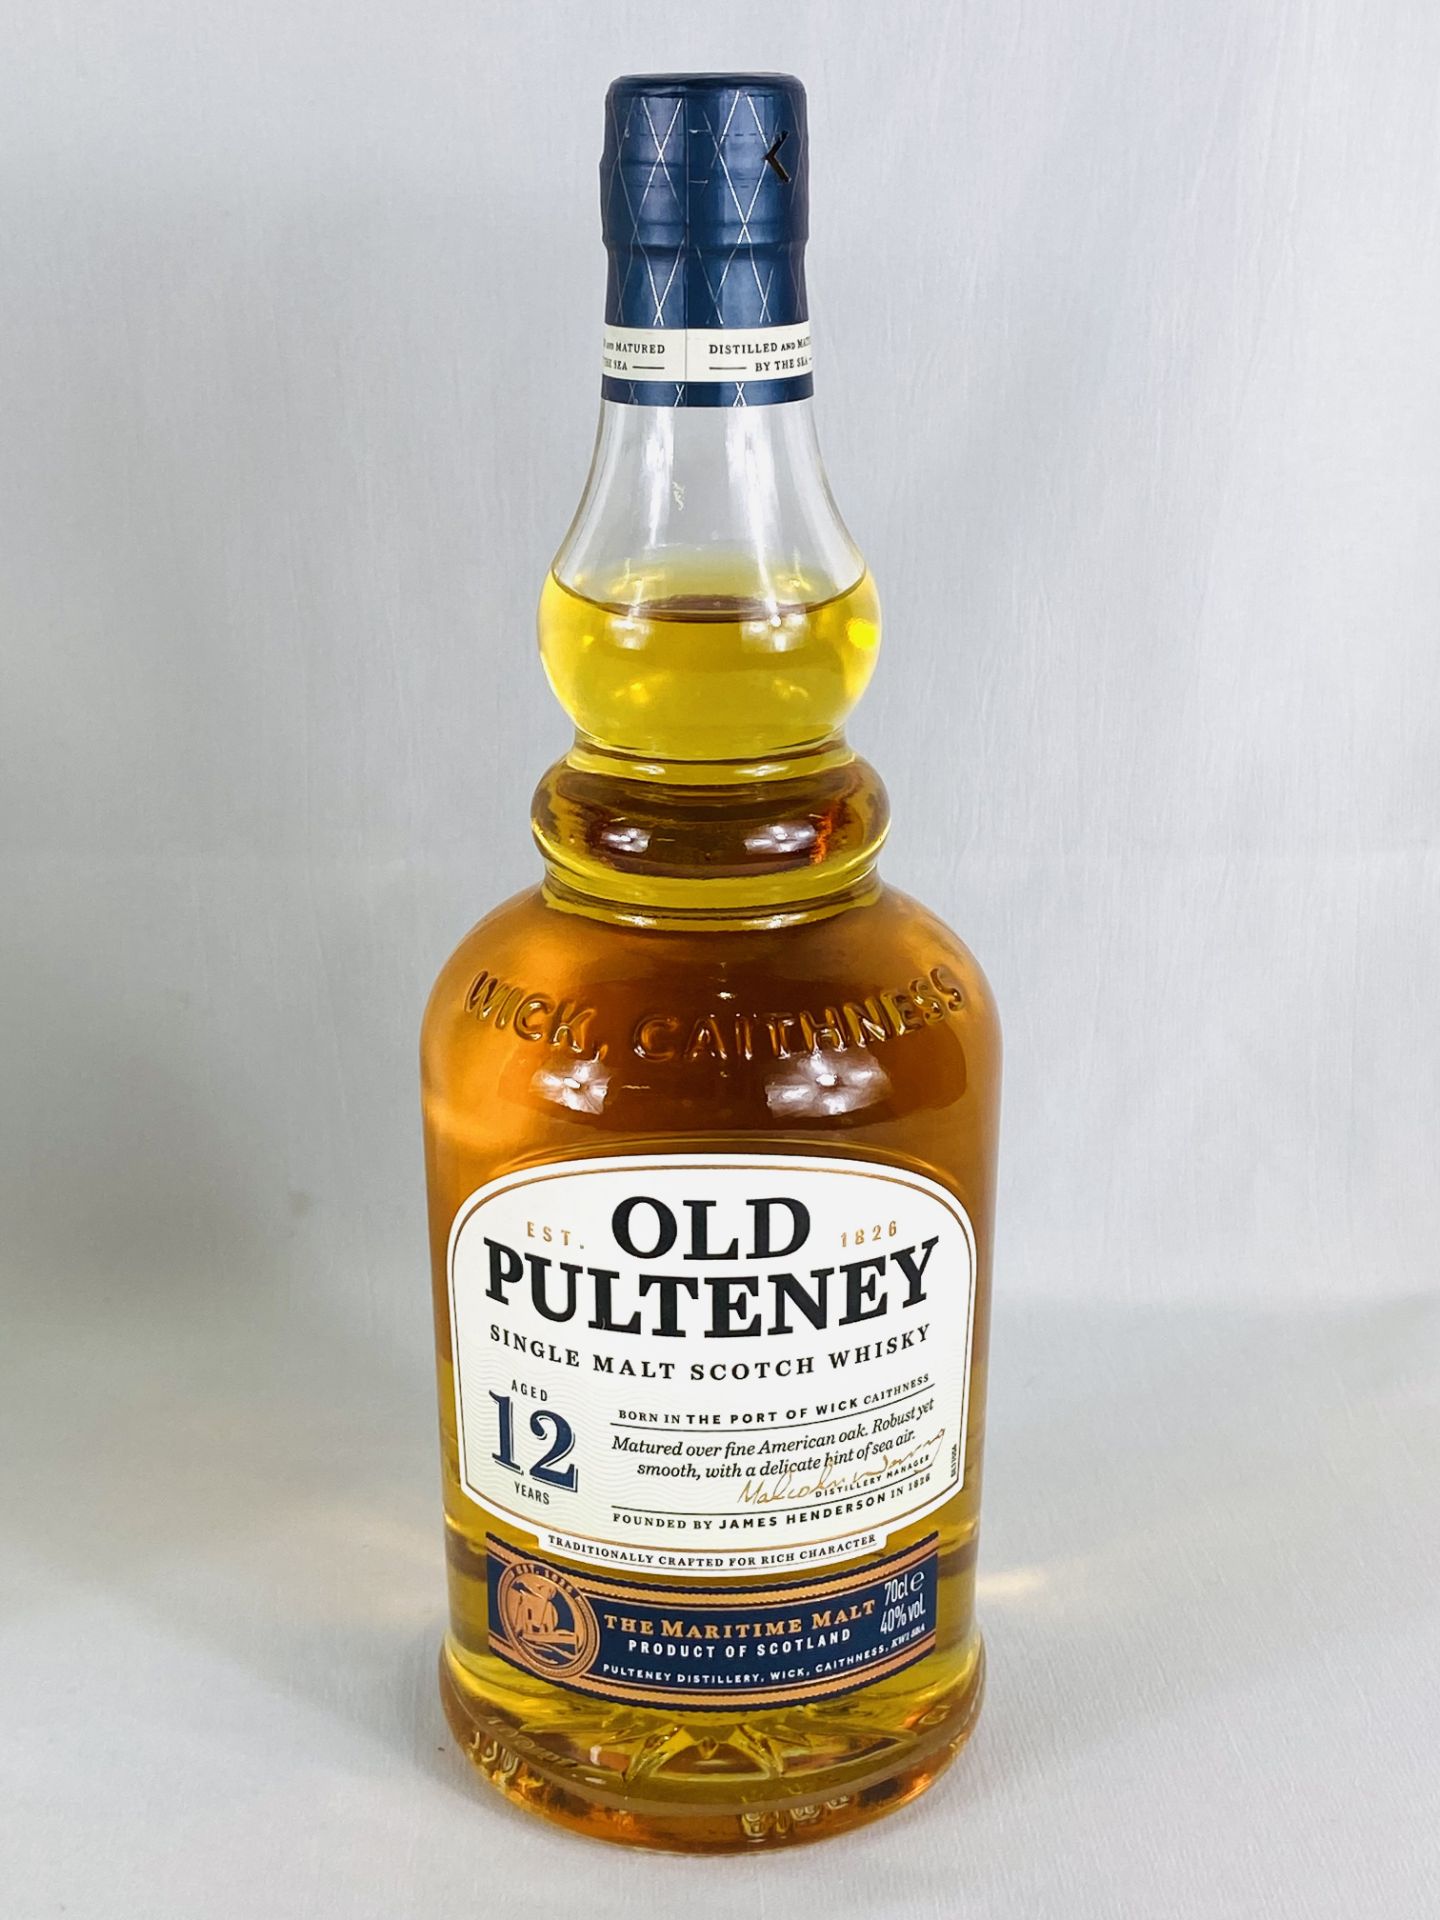 70cl bottle of Old Pulteney Scotch whisky - Image 3 of 3